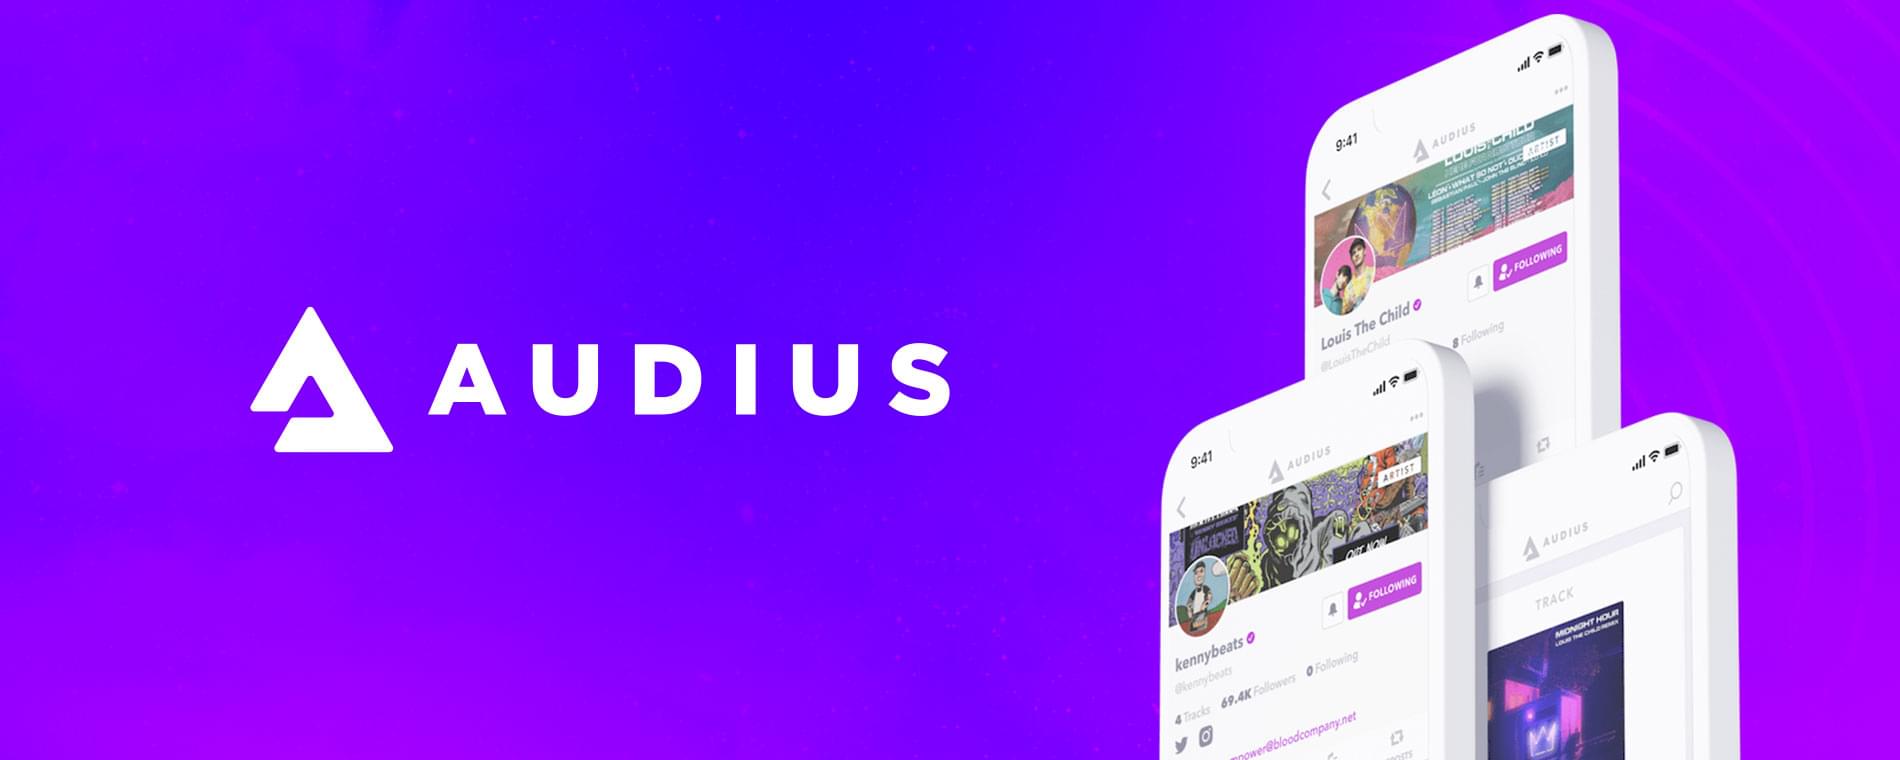 What is Audius